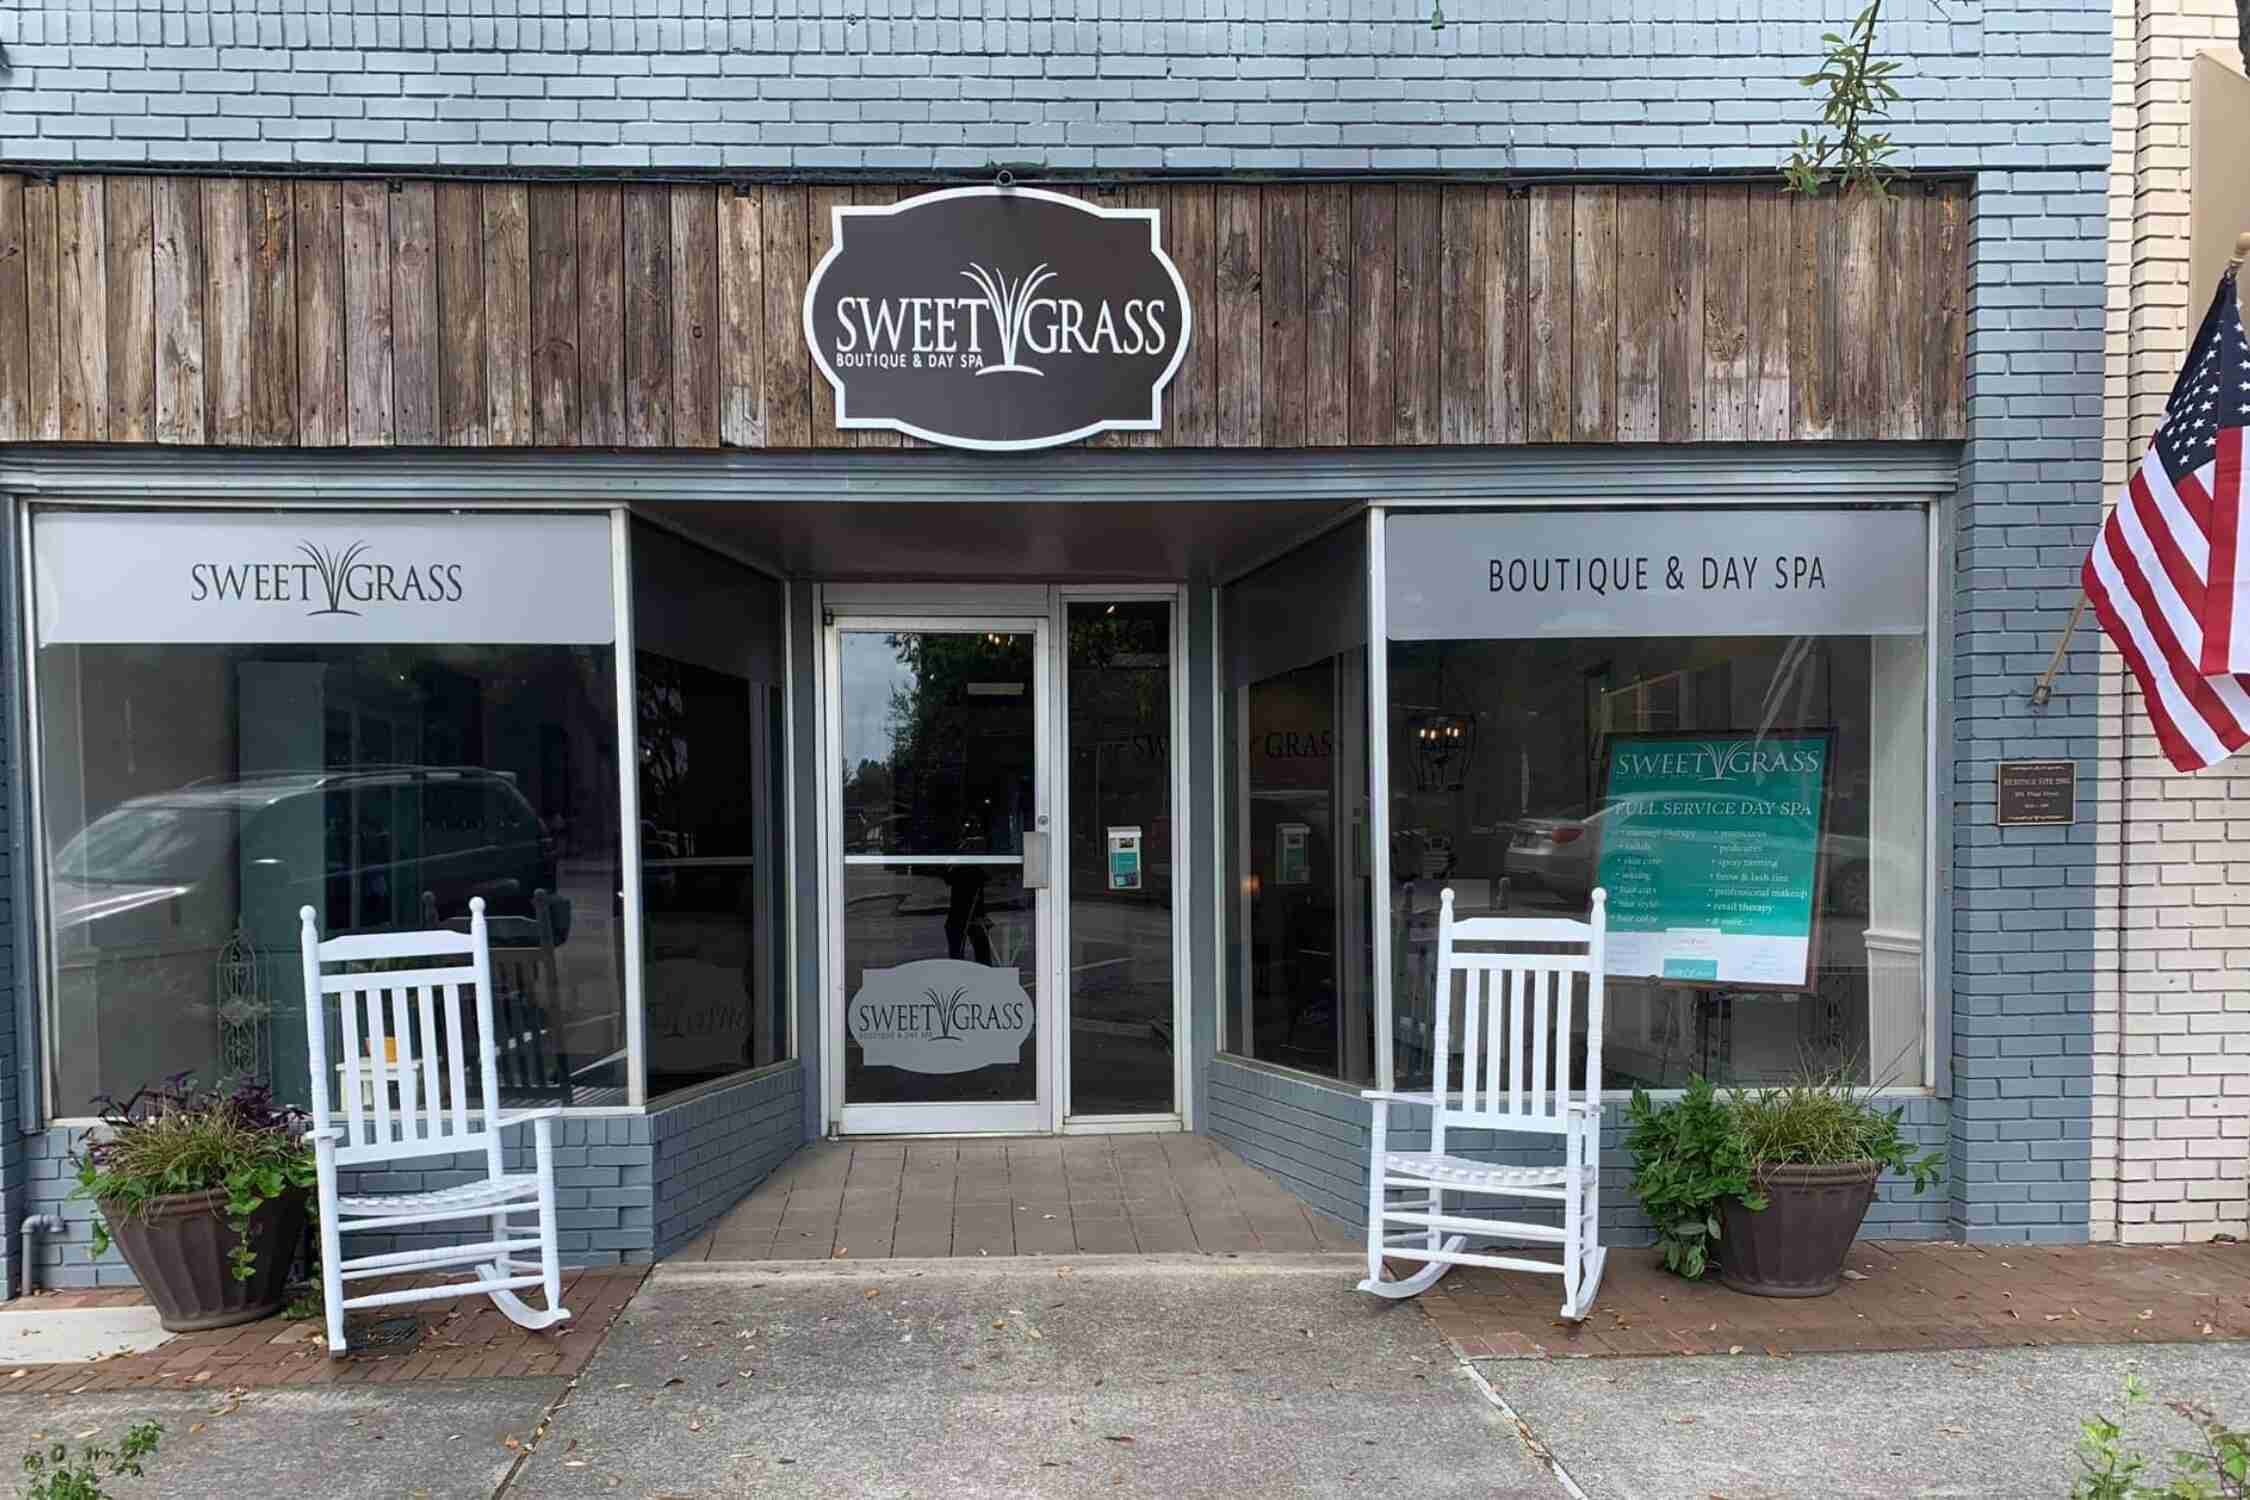 Sweetgrass Boutique & Day Spa